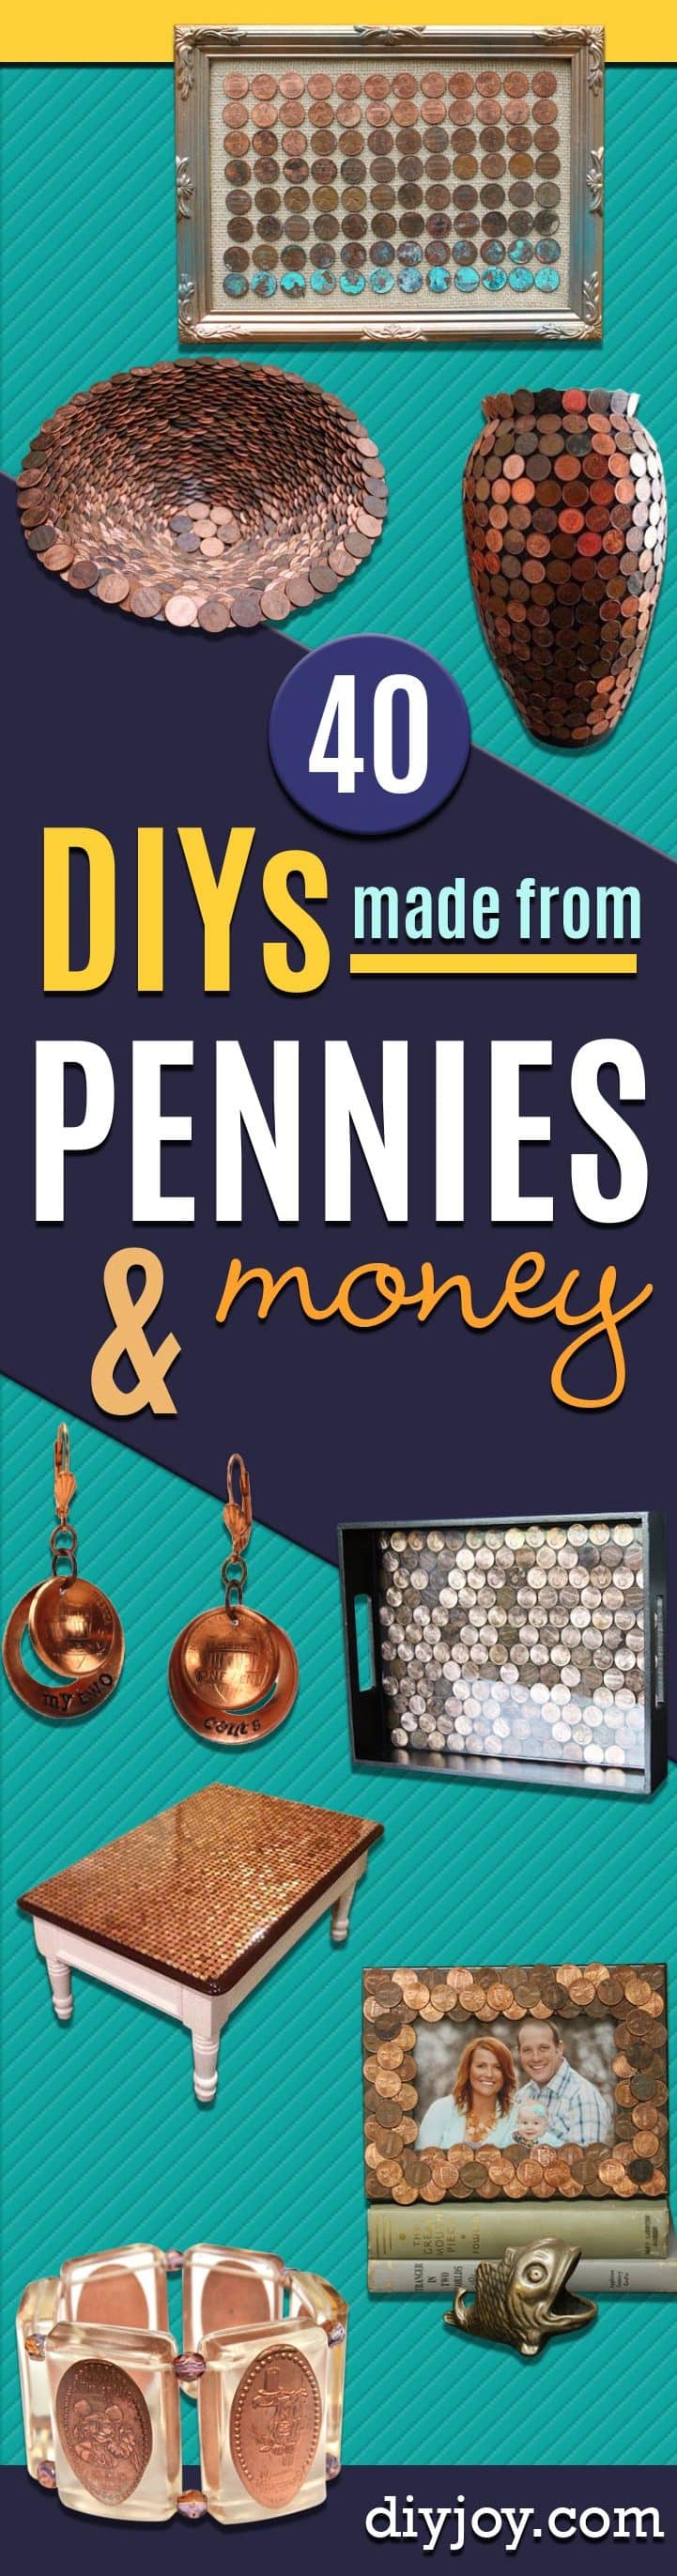 Cool DIYs Made With Money, Dollar Bills and Coins - Walls, Floors, DIY Penny Table. Art With Pennies, Walls and Furniture Make With Money, Dollar Bills and Coins. Cool, Creative Tutorials, Home Decor and DIY Projects Made With Cash